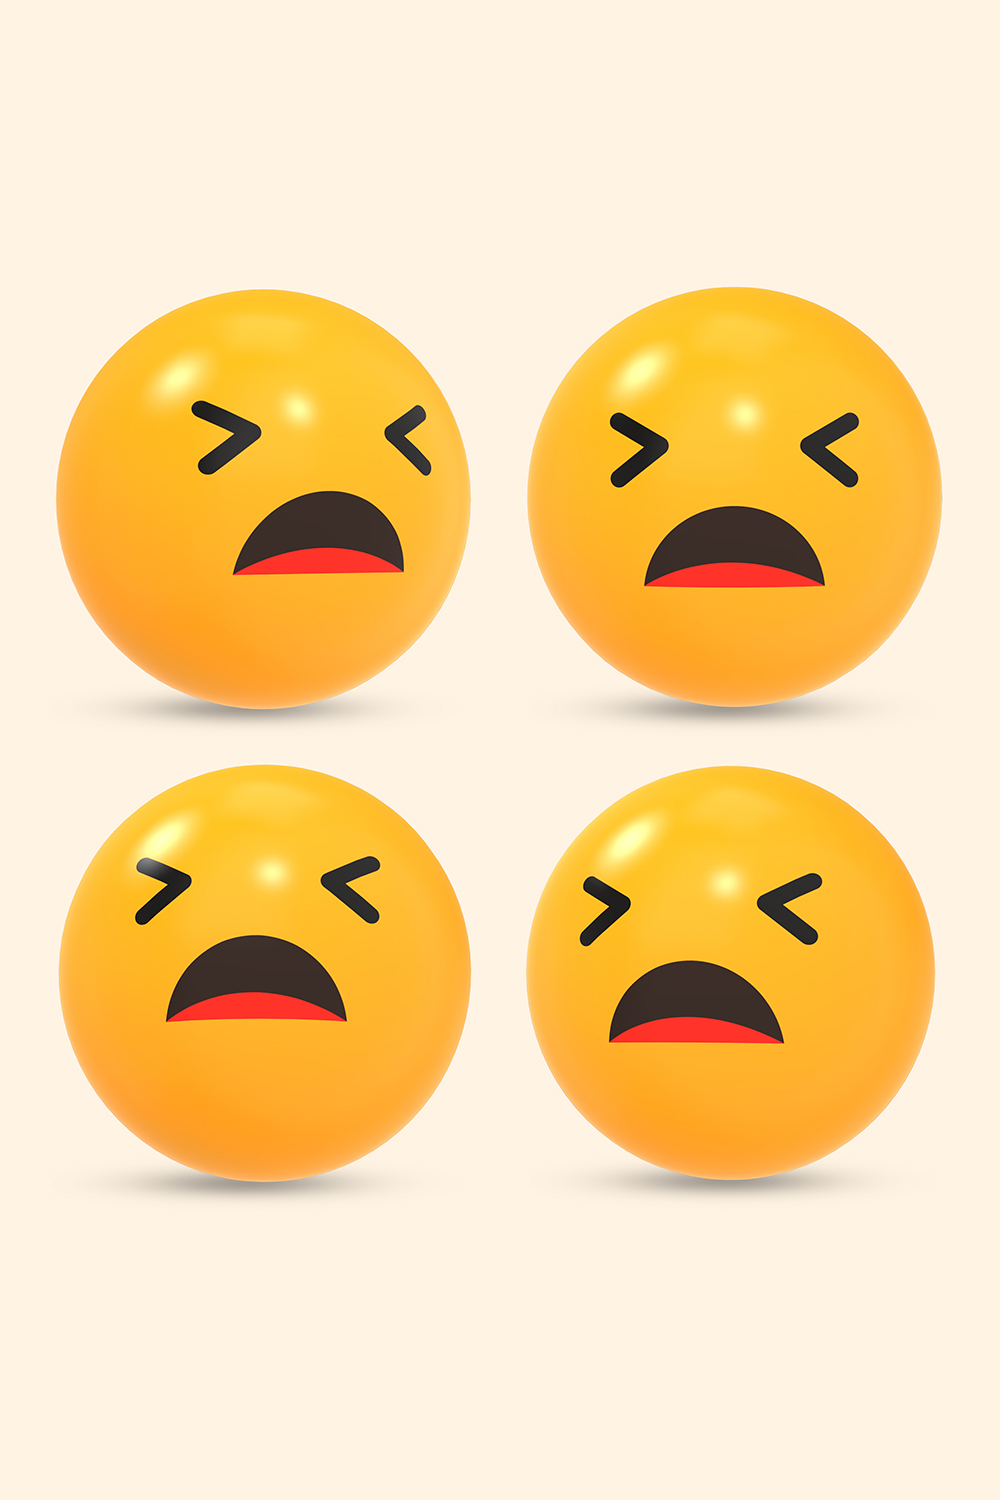 3D rendered social media icon of tired face emoji reaction with different view pinterest preview image.